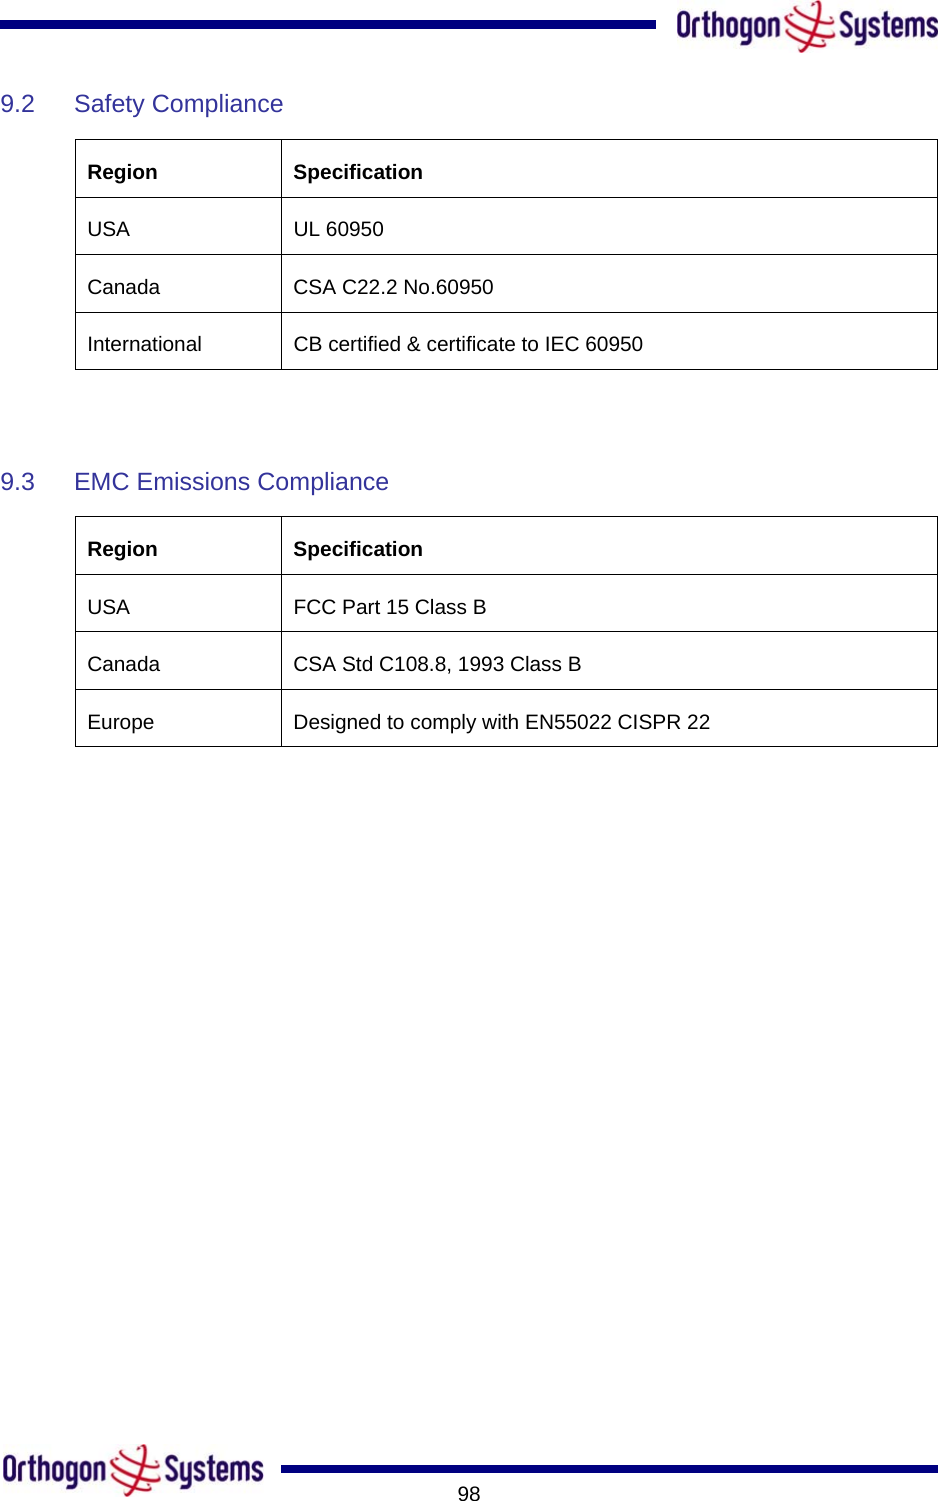       989.2  Safety Compliance  Region Specification USA UL 60950 Canada CSA C22.2 No.60950 International CB certified &amp; certificate to IEC 60950    9.3  EMC Emissions Compliance   Region Specification USA  FCC Part 15 Class B Canada  CSA Std C108.8, 1993 Class B Europe  Designed to comply with EN55022 CISPR 22    